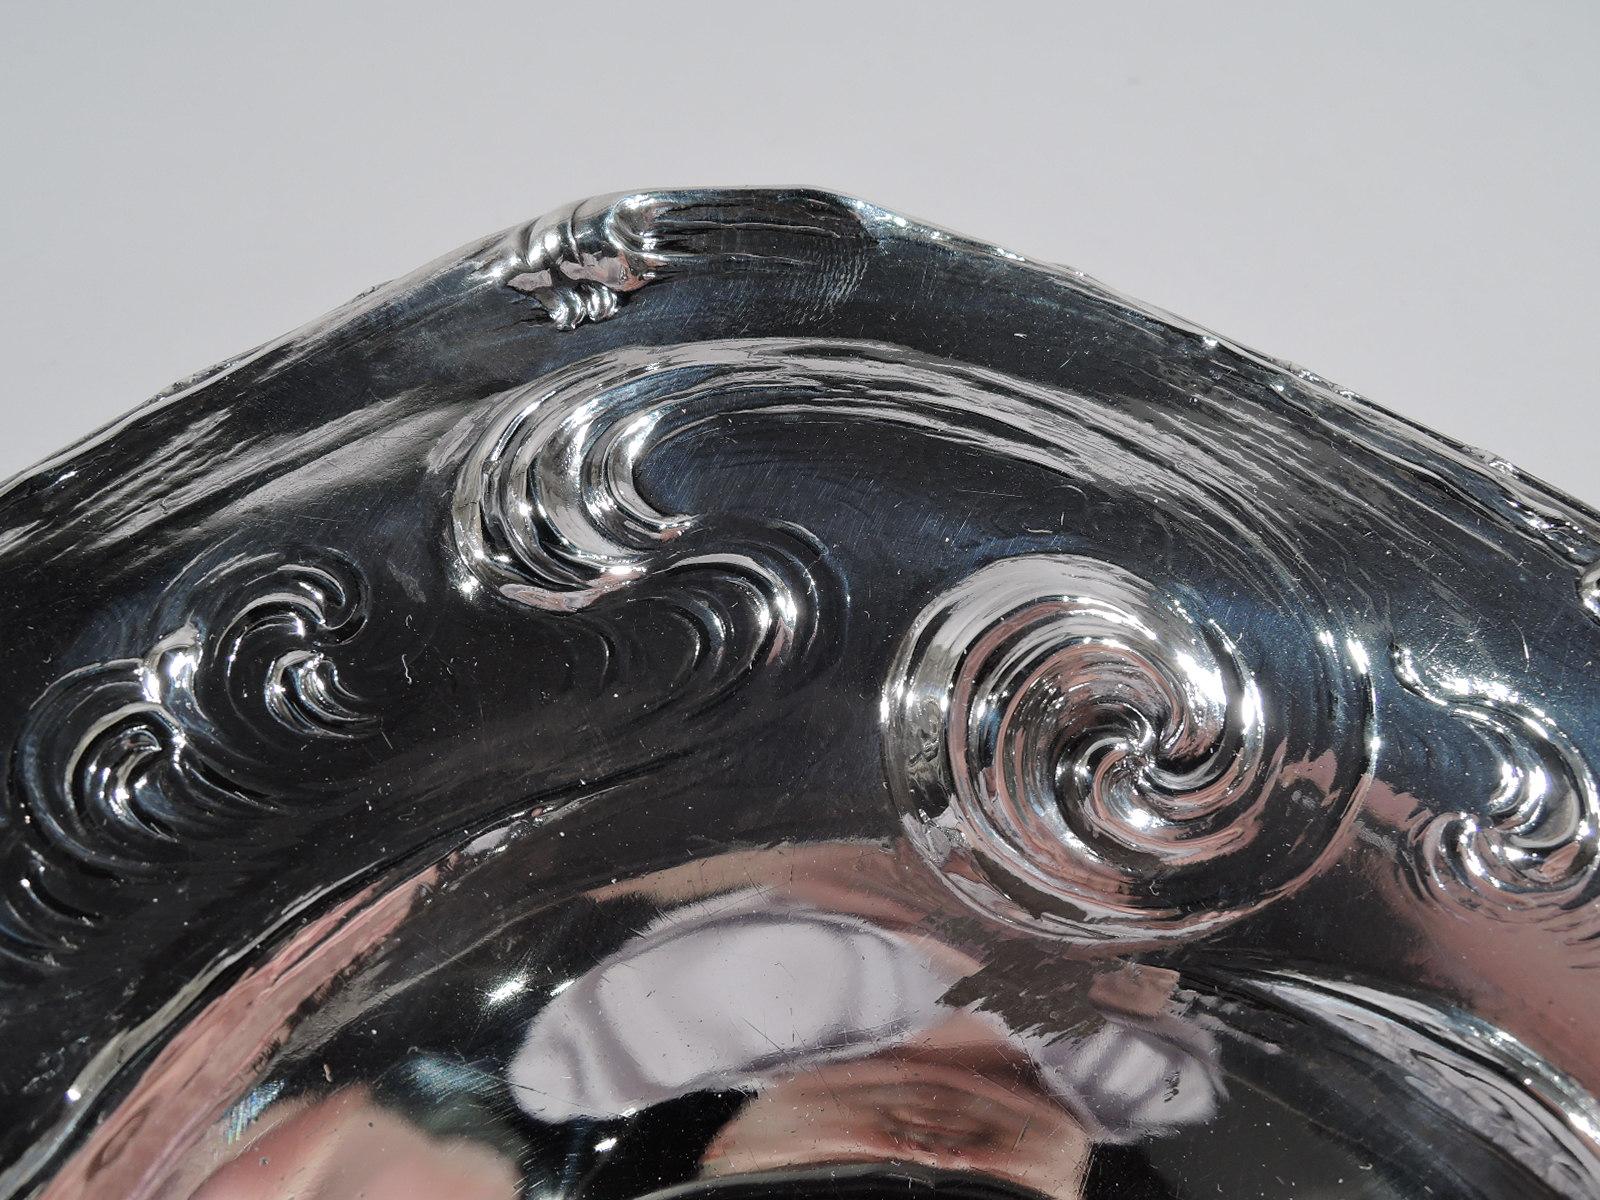 North American Antique American Art Nouveau Sterling Silver Lorelei Whirlpool Bowl For Sale